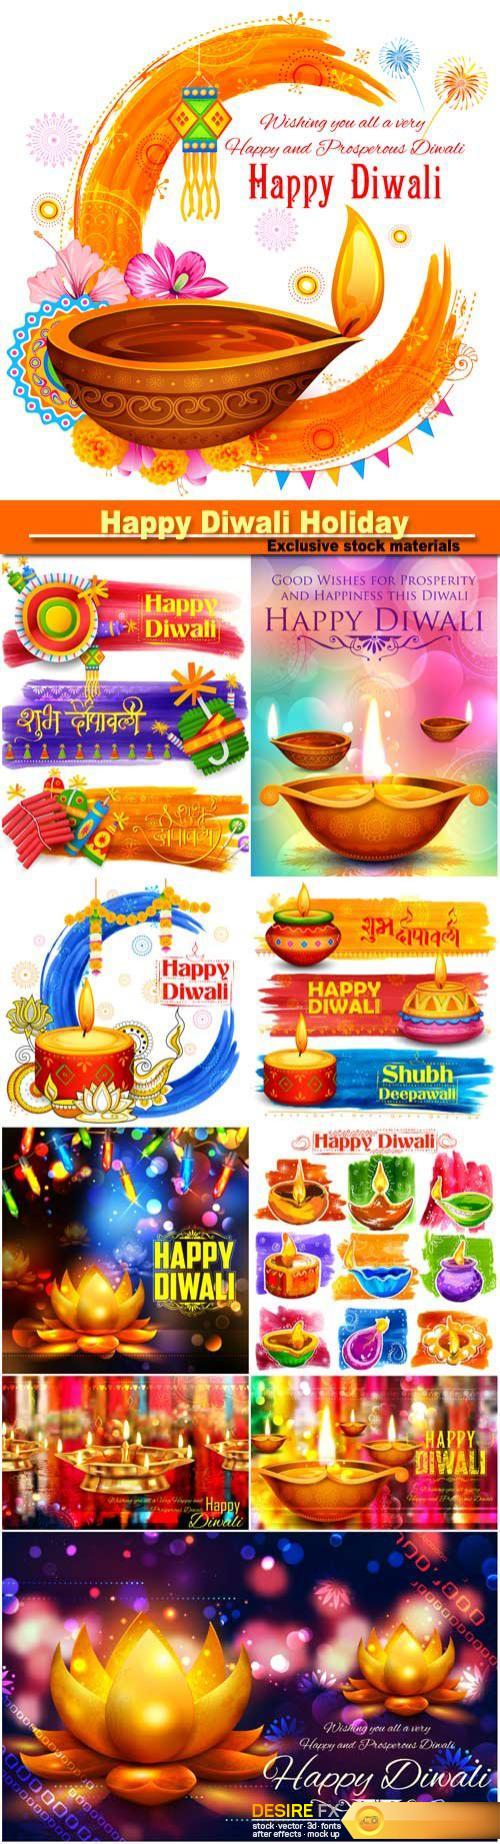 Happy Diwali Holiday background for light festival of India